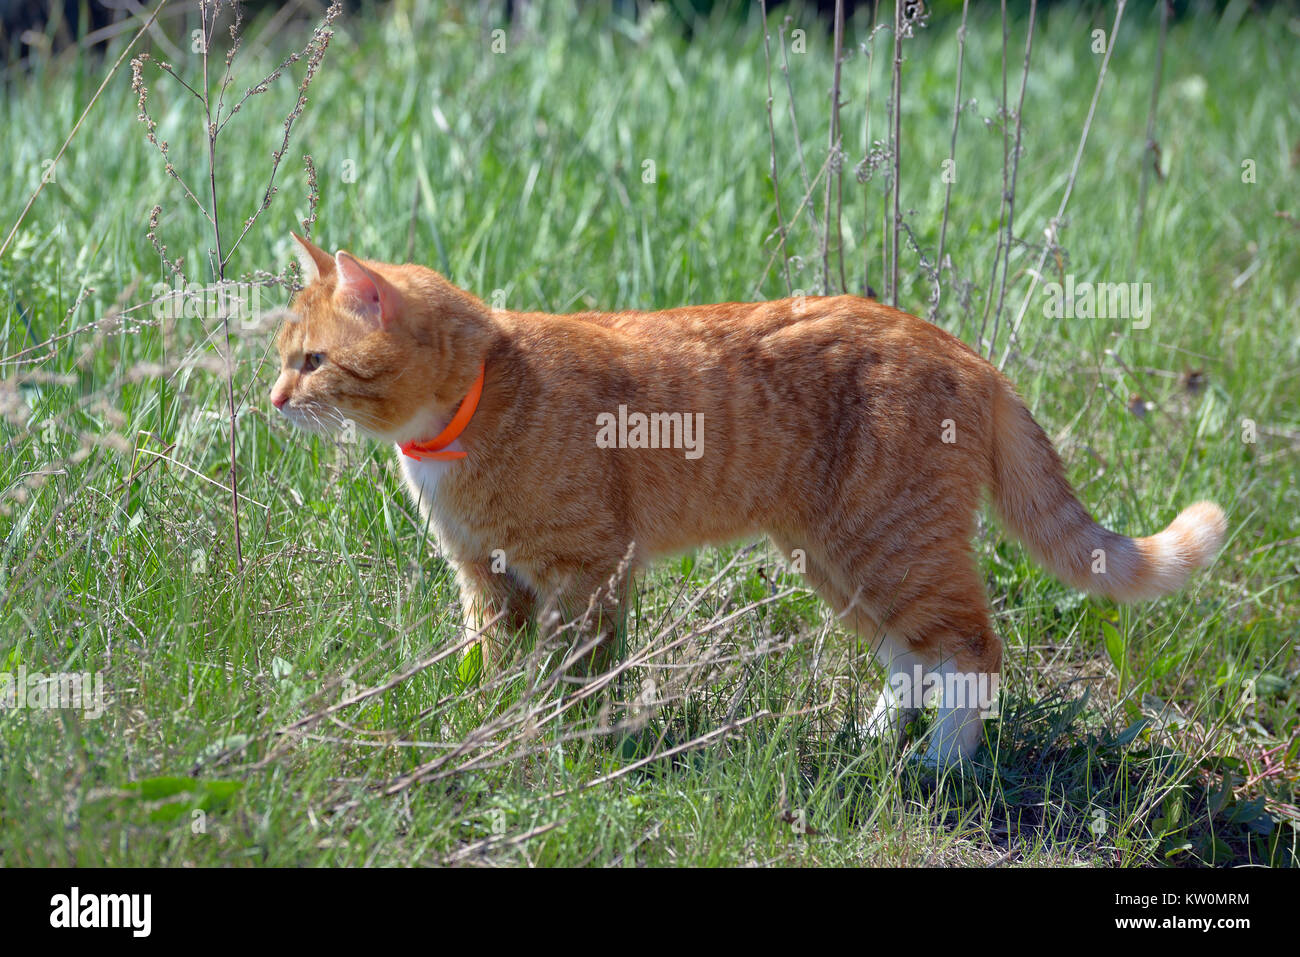 Standing in the grass red cat in a  orange pet collar Stock Photo